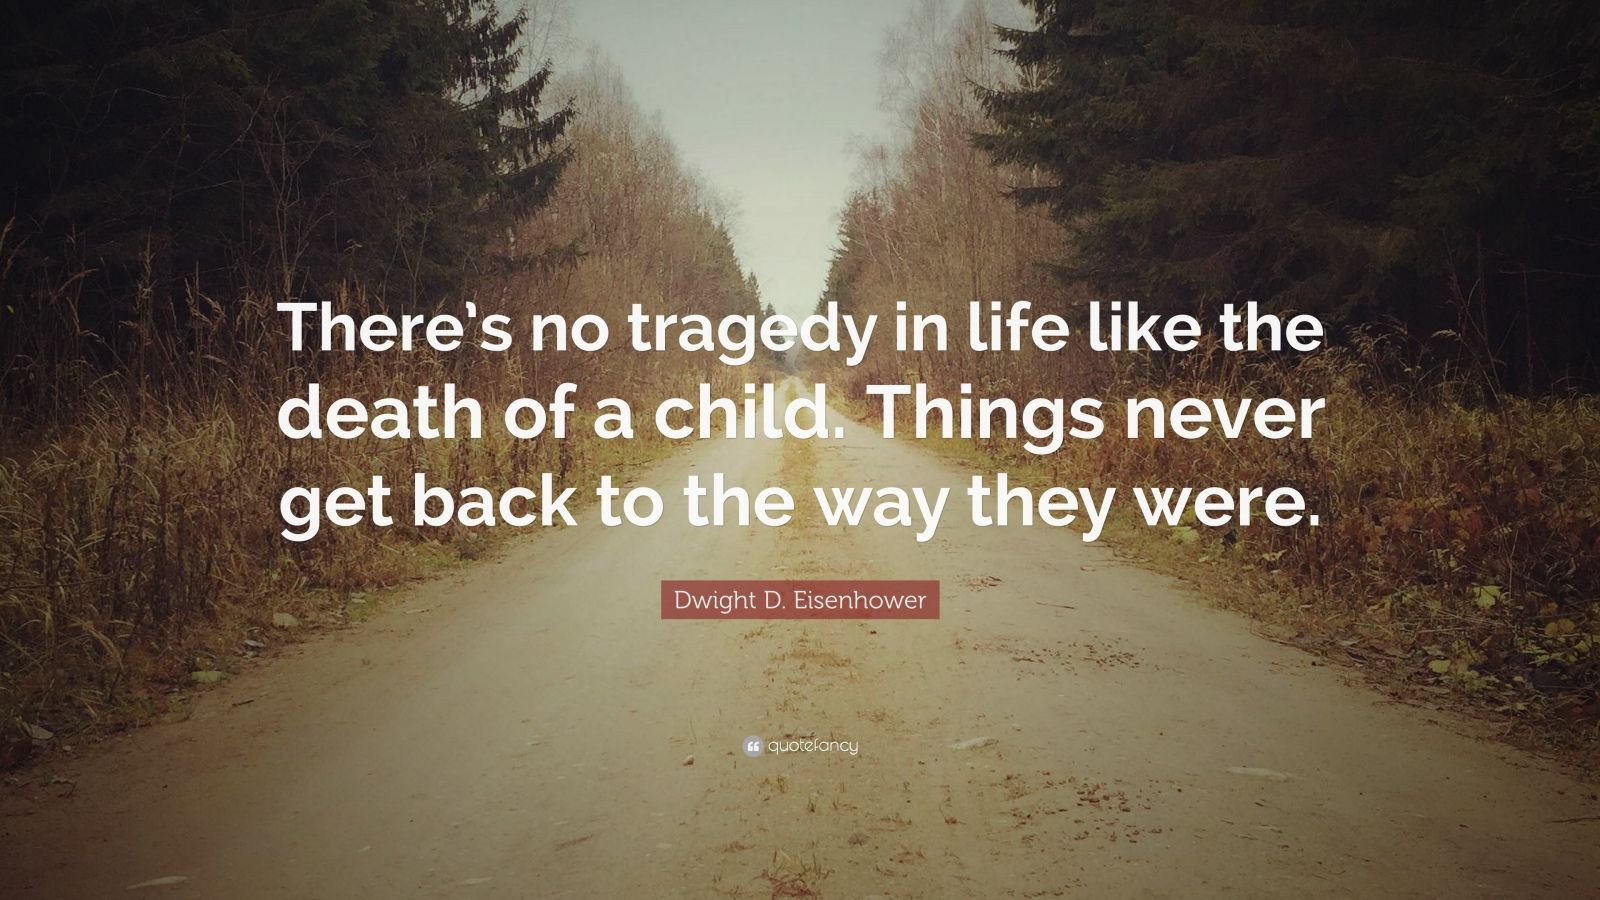 Quote About Death Of A Child
 Dwight D Eisenhower Quote “There’s no tragedy in life